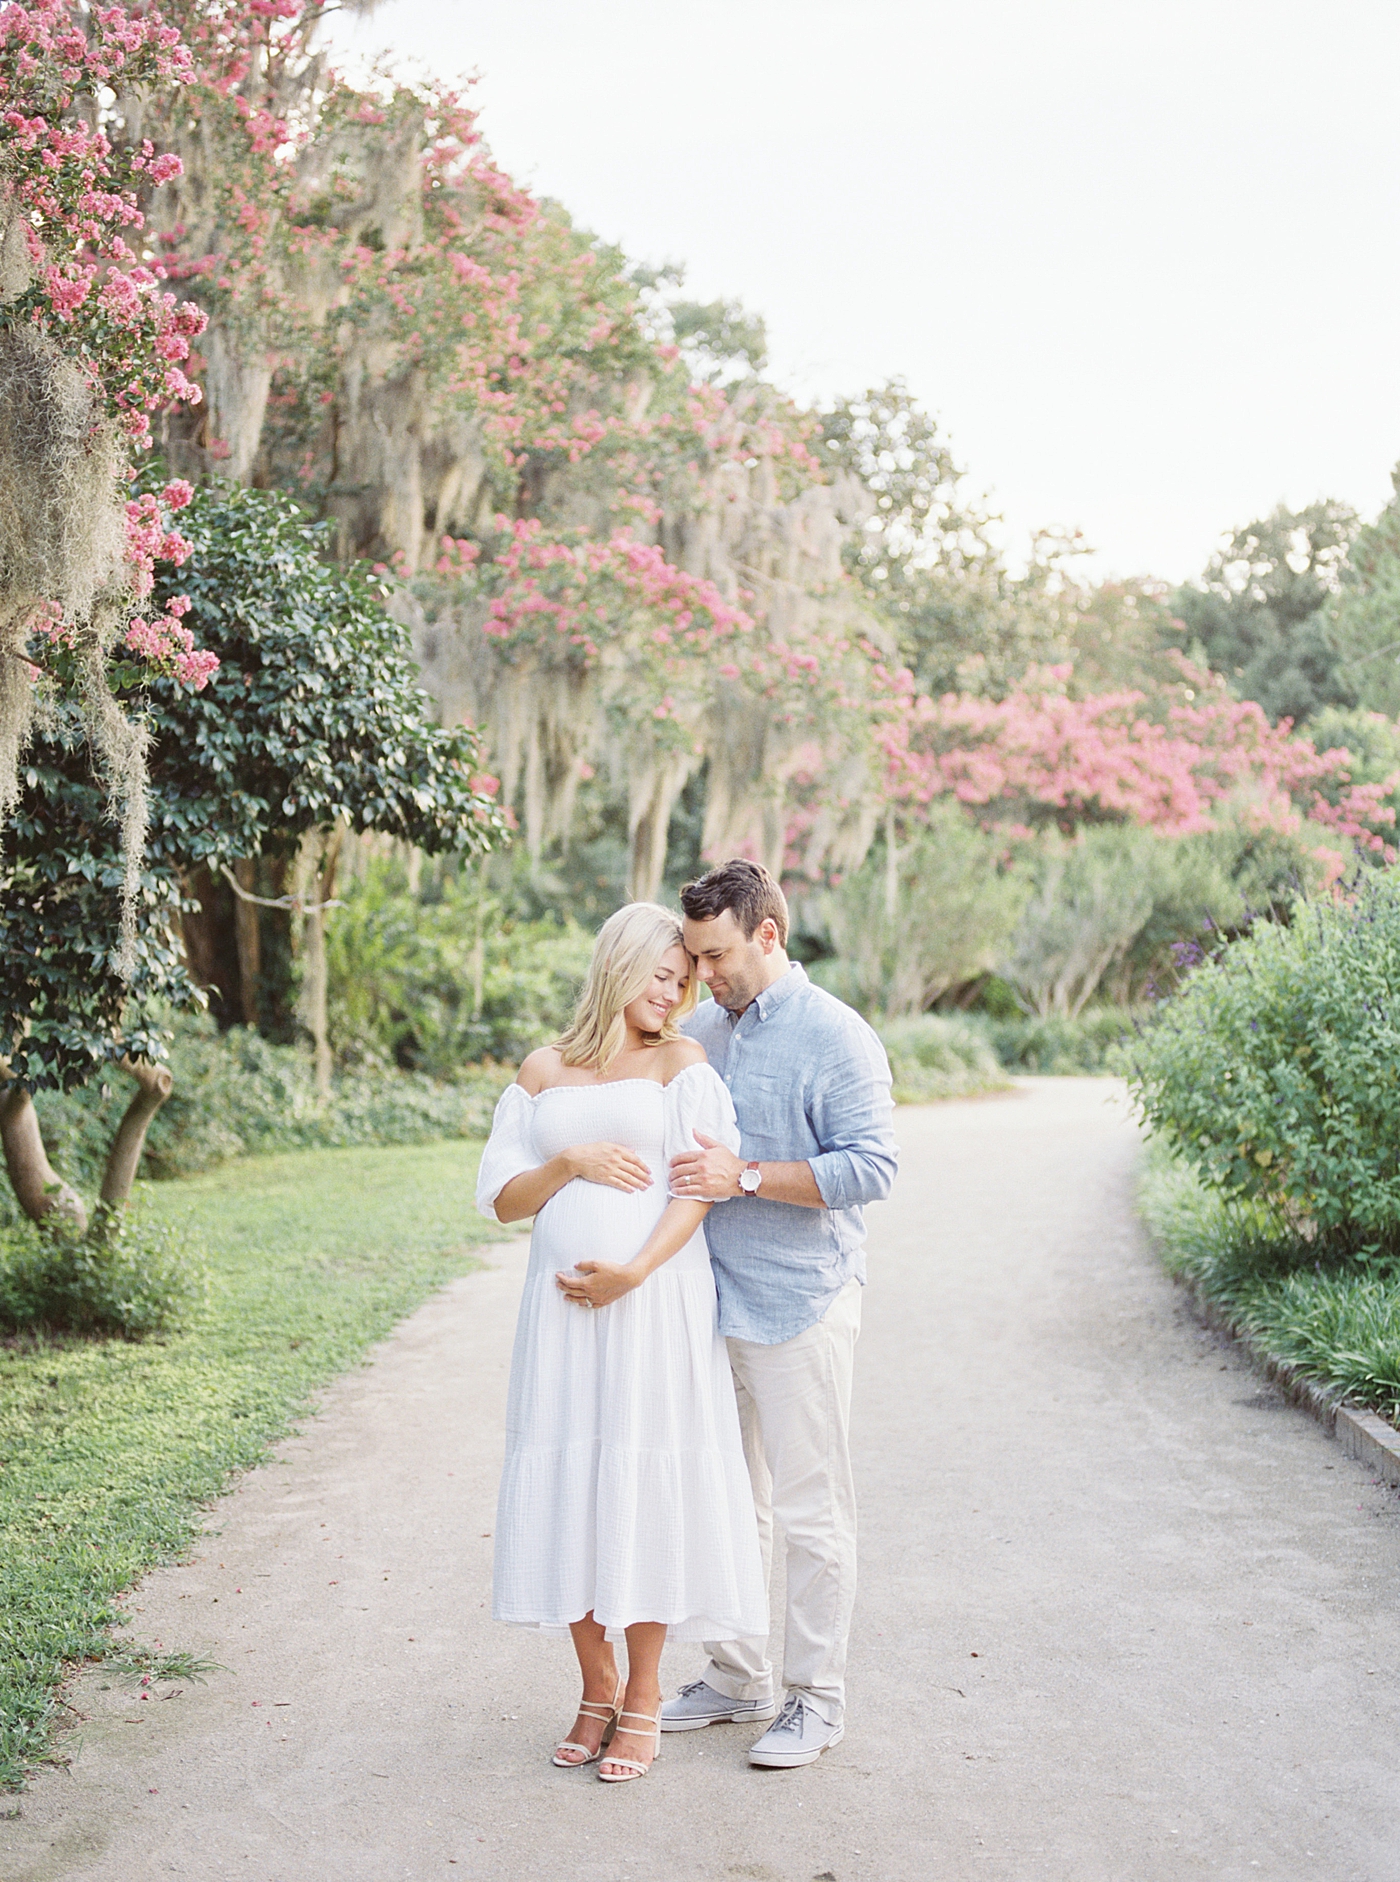 Mom and dad to be snuggling in the park | Dad's Wardrobe Fall Sessions with Caitlyn Motycka Photography